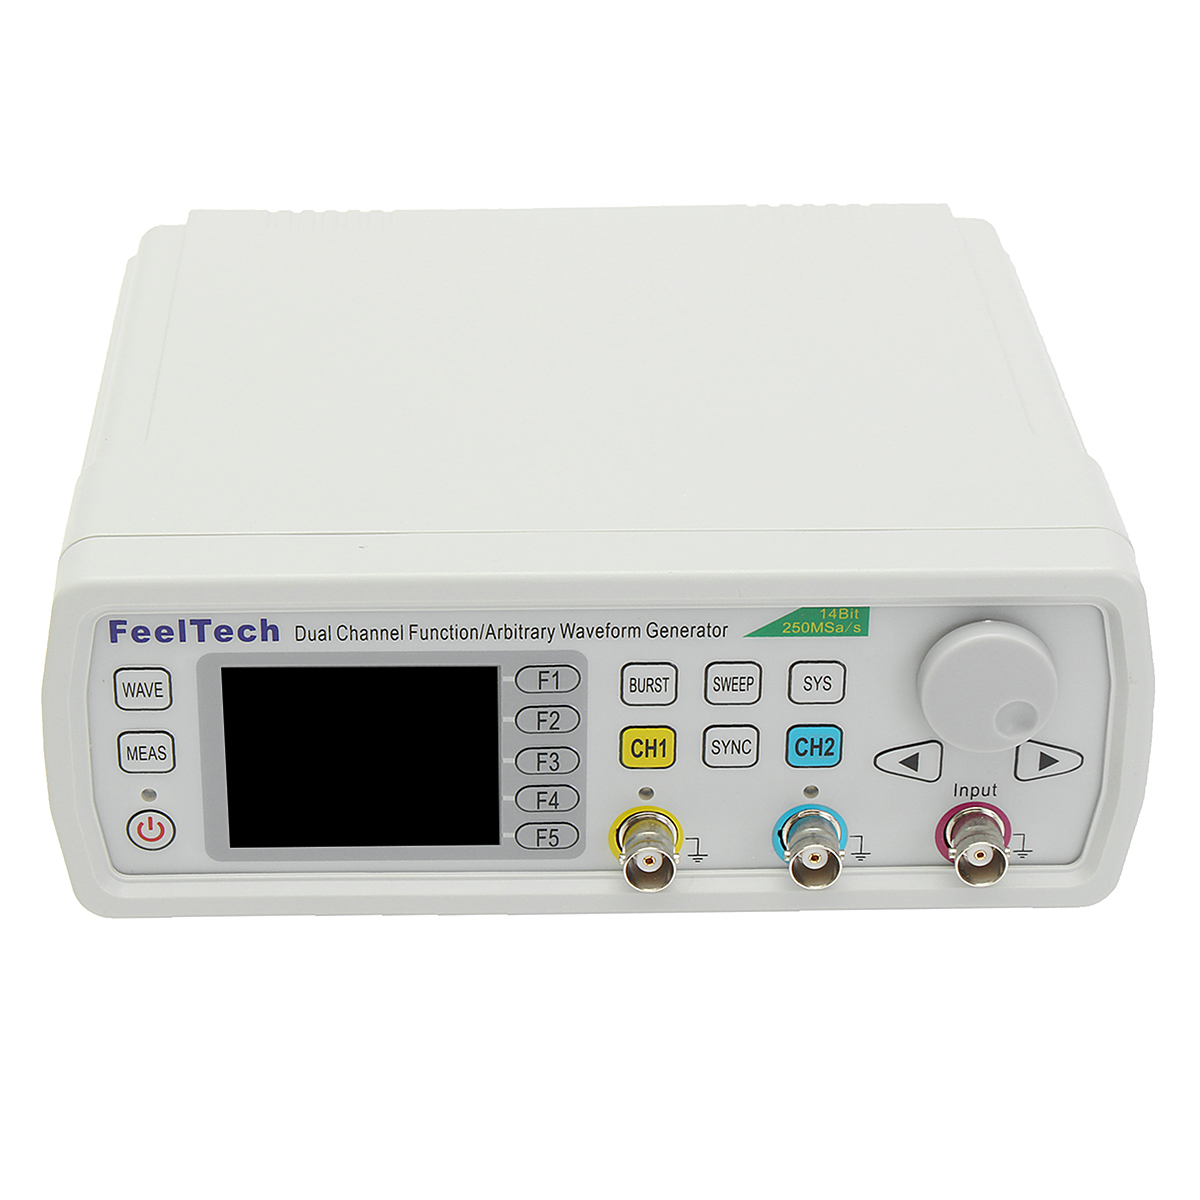 FY6600 Digital 12-60MHz Dual Channel DDS Function Arbitrary Waveform Signal Generator Frequency Meter 13